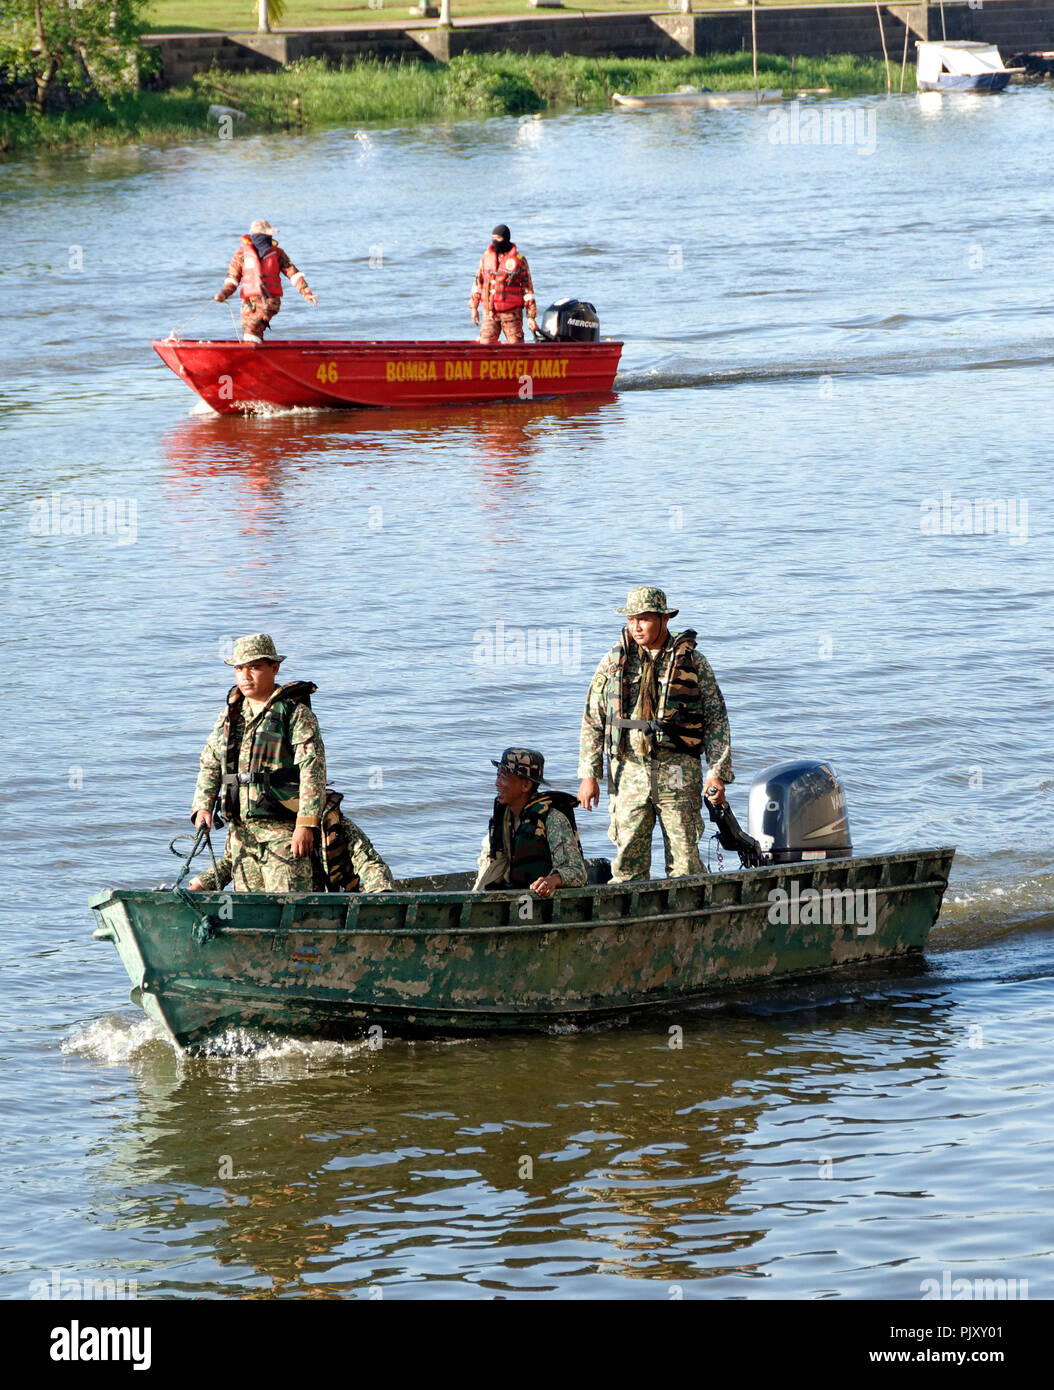 Kuching, Sarawak river, boats fire services and soldiers form part of the Gawai day parade and celebration Stock Photo